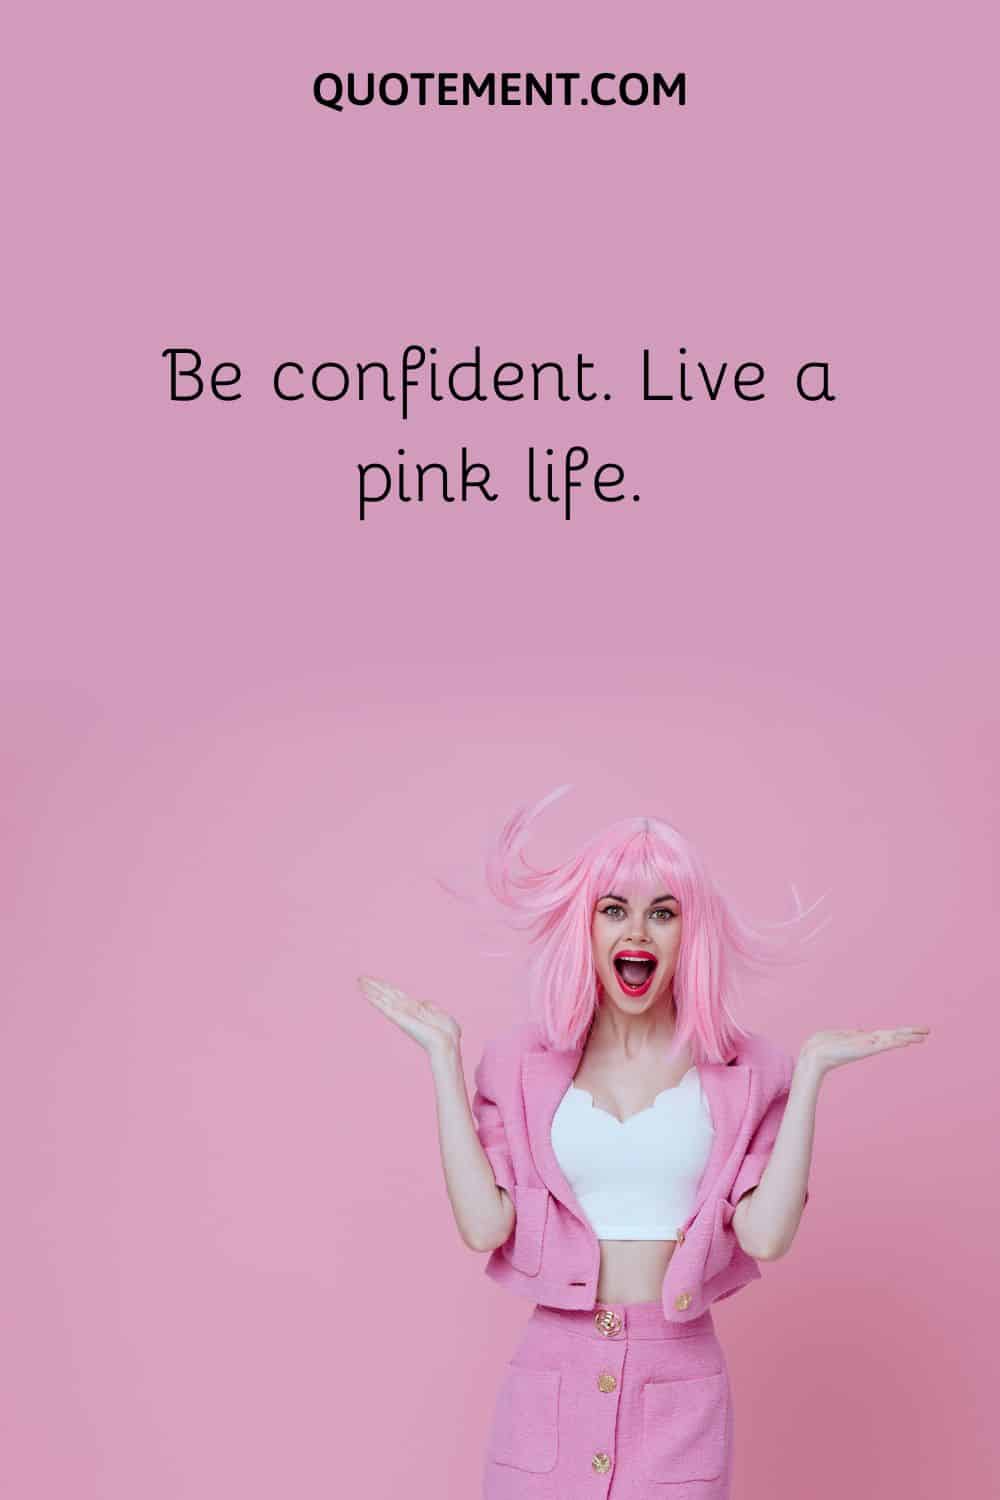  Be confident. Live a pink life.
